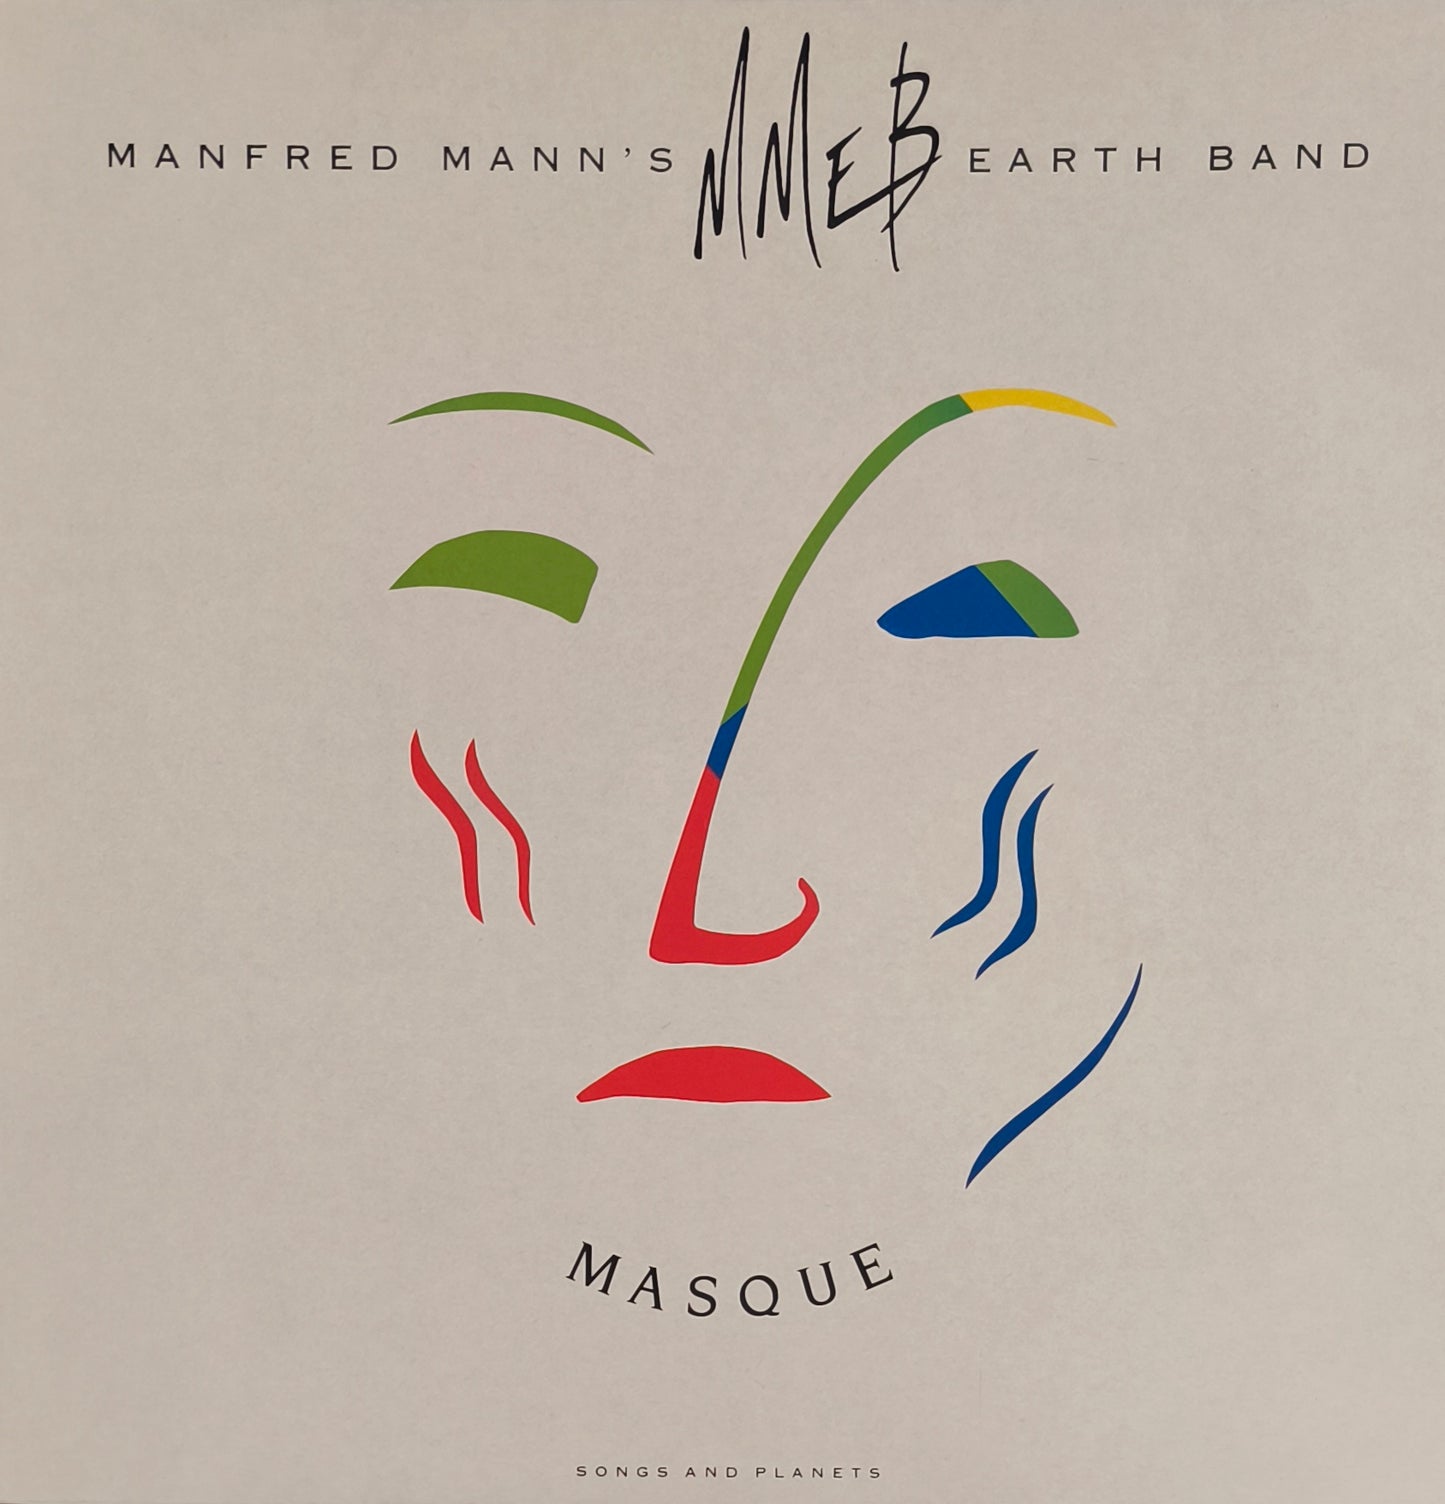 MANFRED MANN'S EARTH BAND  - Masque (songs and planets)